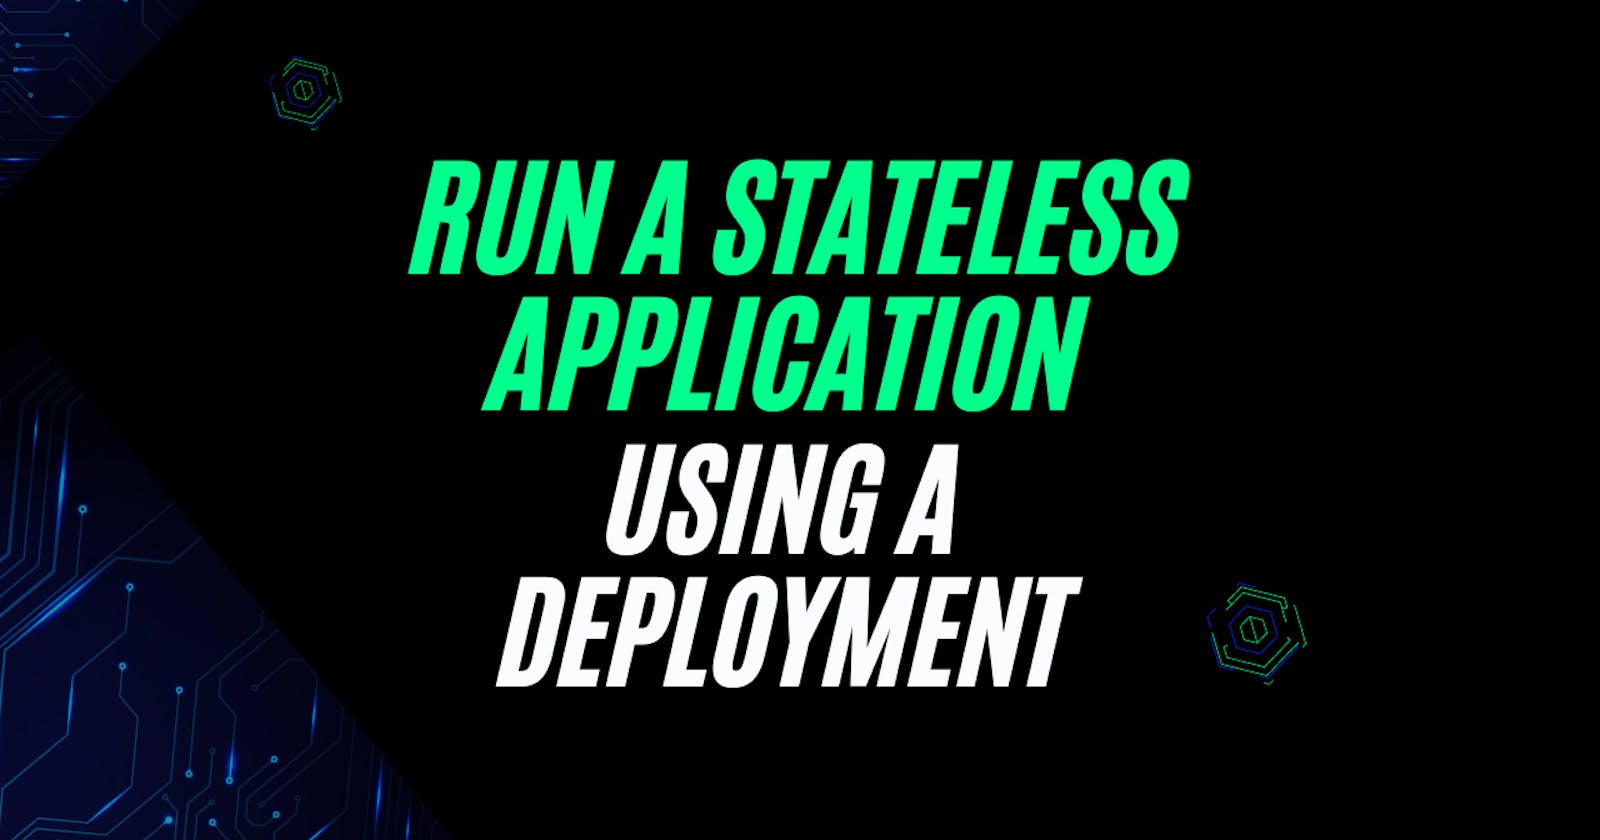 Mastering Stateless Application Deployment: A Step-by-Step Guide"